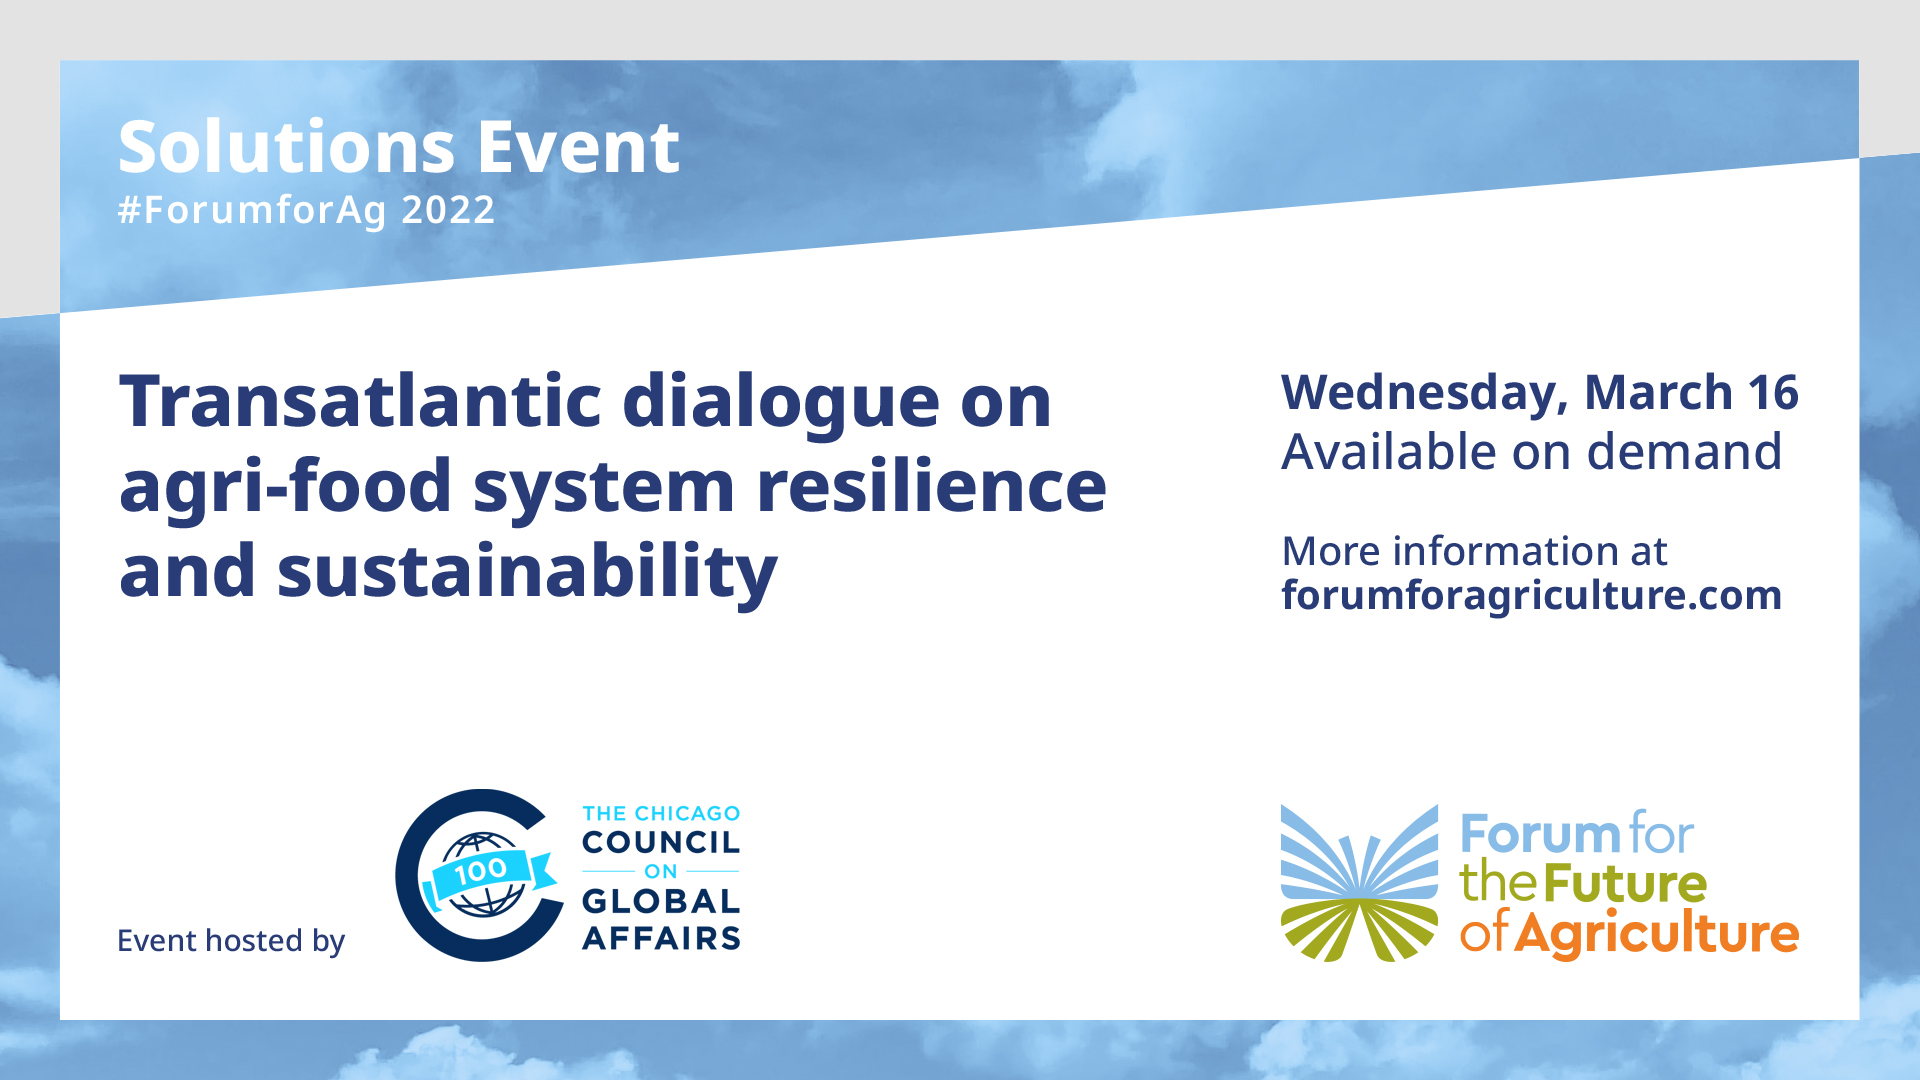 2022 ForumforAg | Solutions event 1 | Transatlantic dialogue on agri-food system resilience and sustainability video iamge